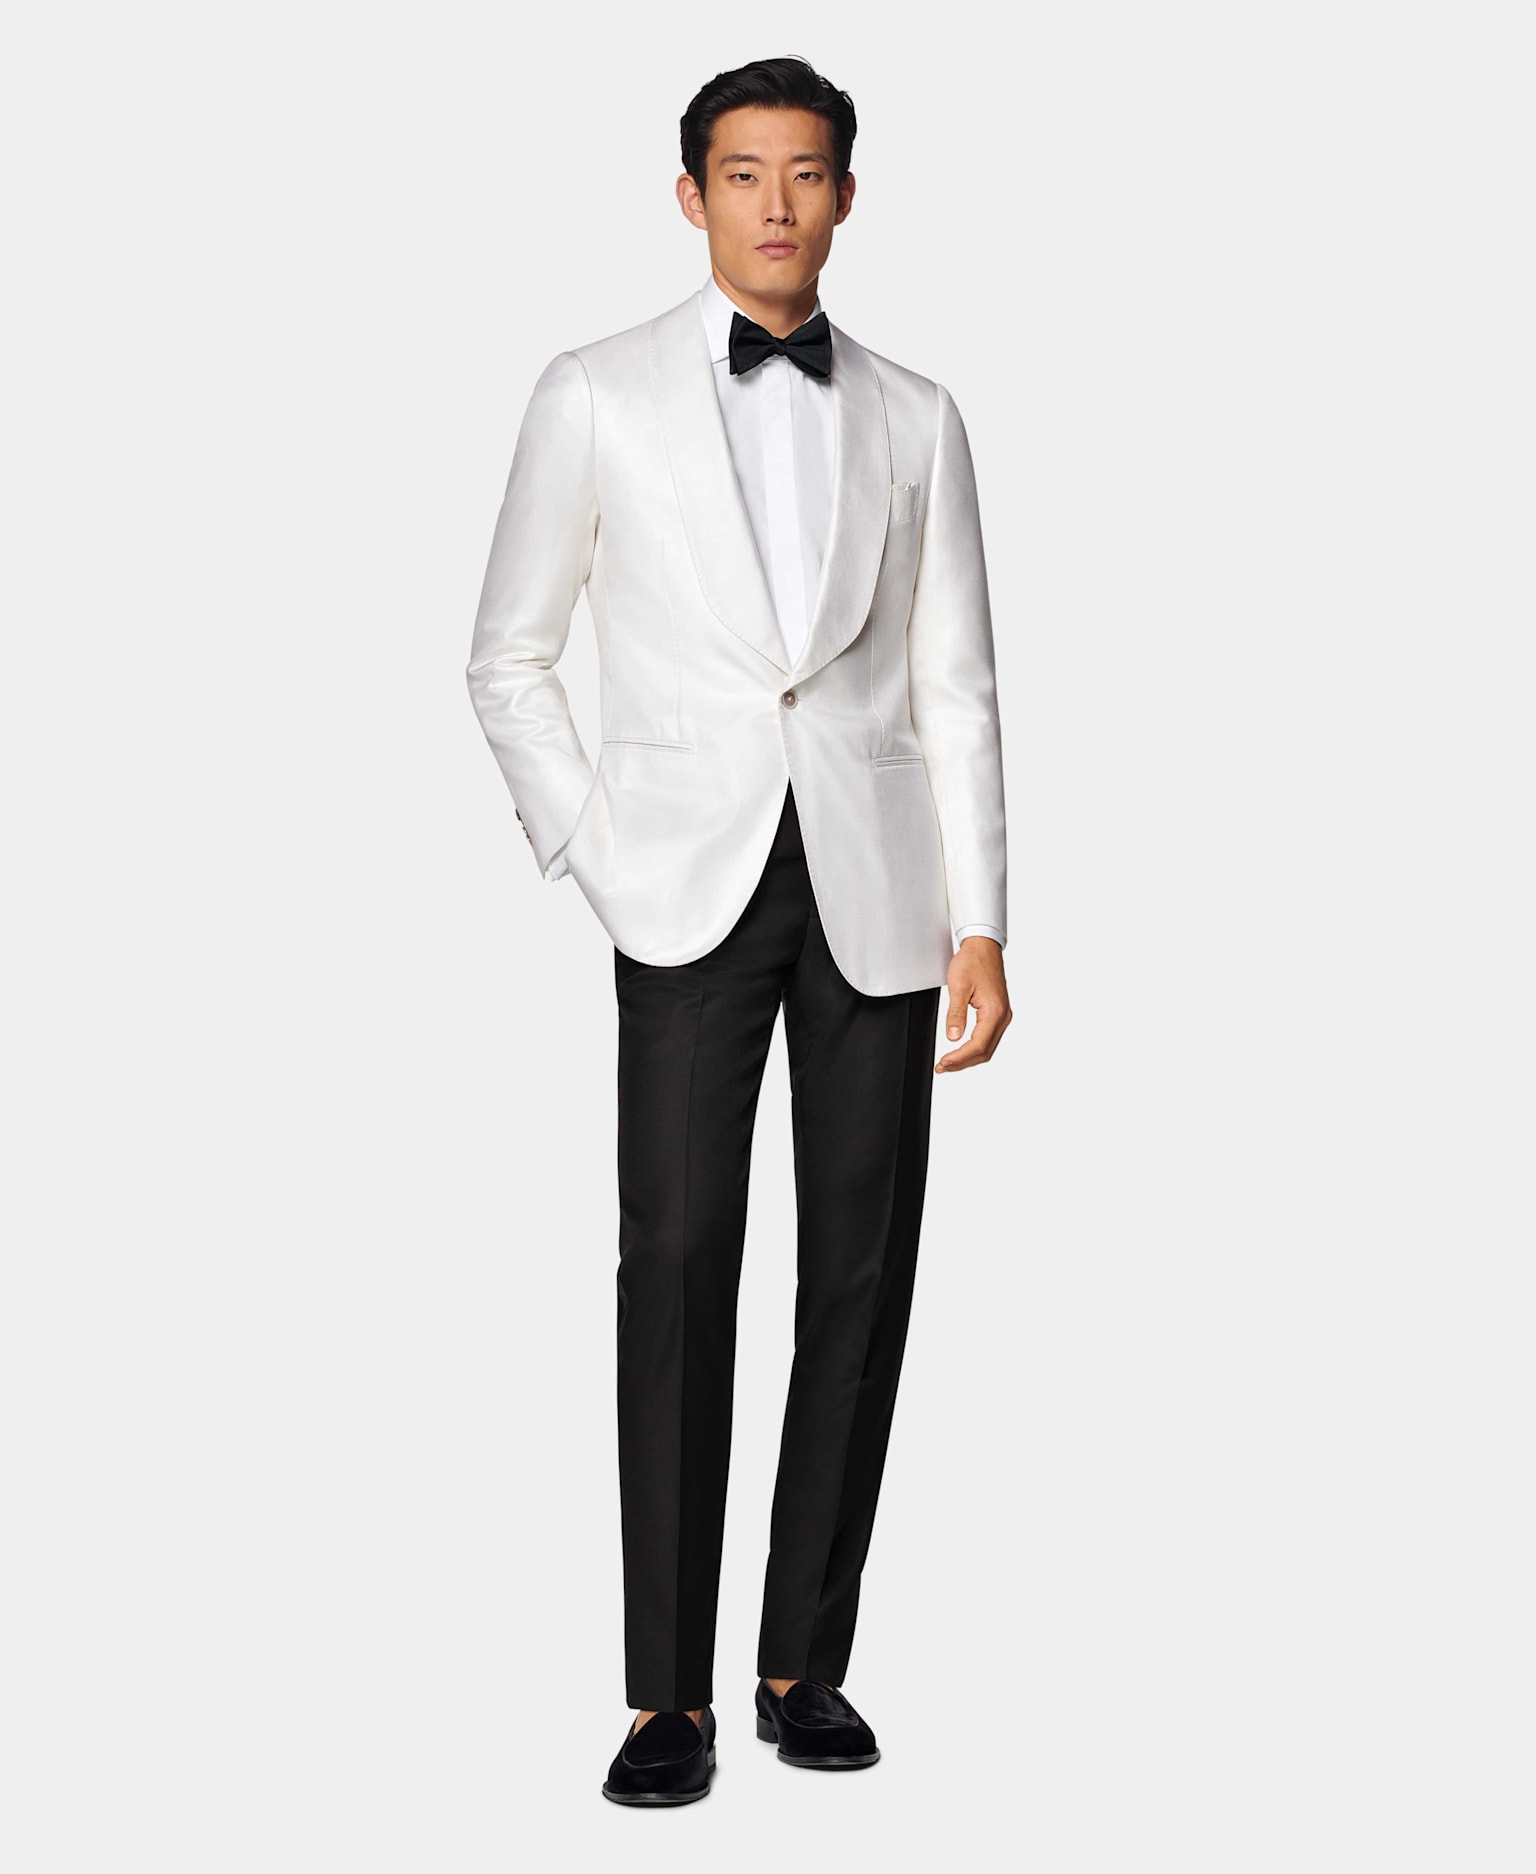 white shawl-collar dinner jacket & black trouser pairing with white hidden placket shirt and black silk bow tie.